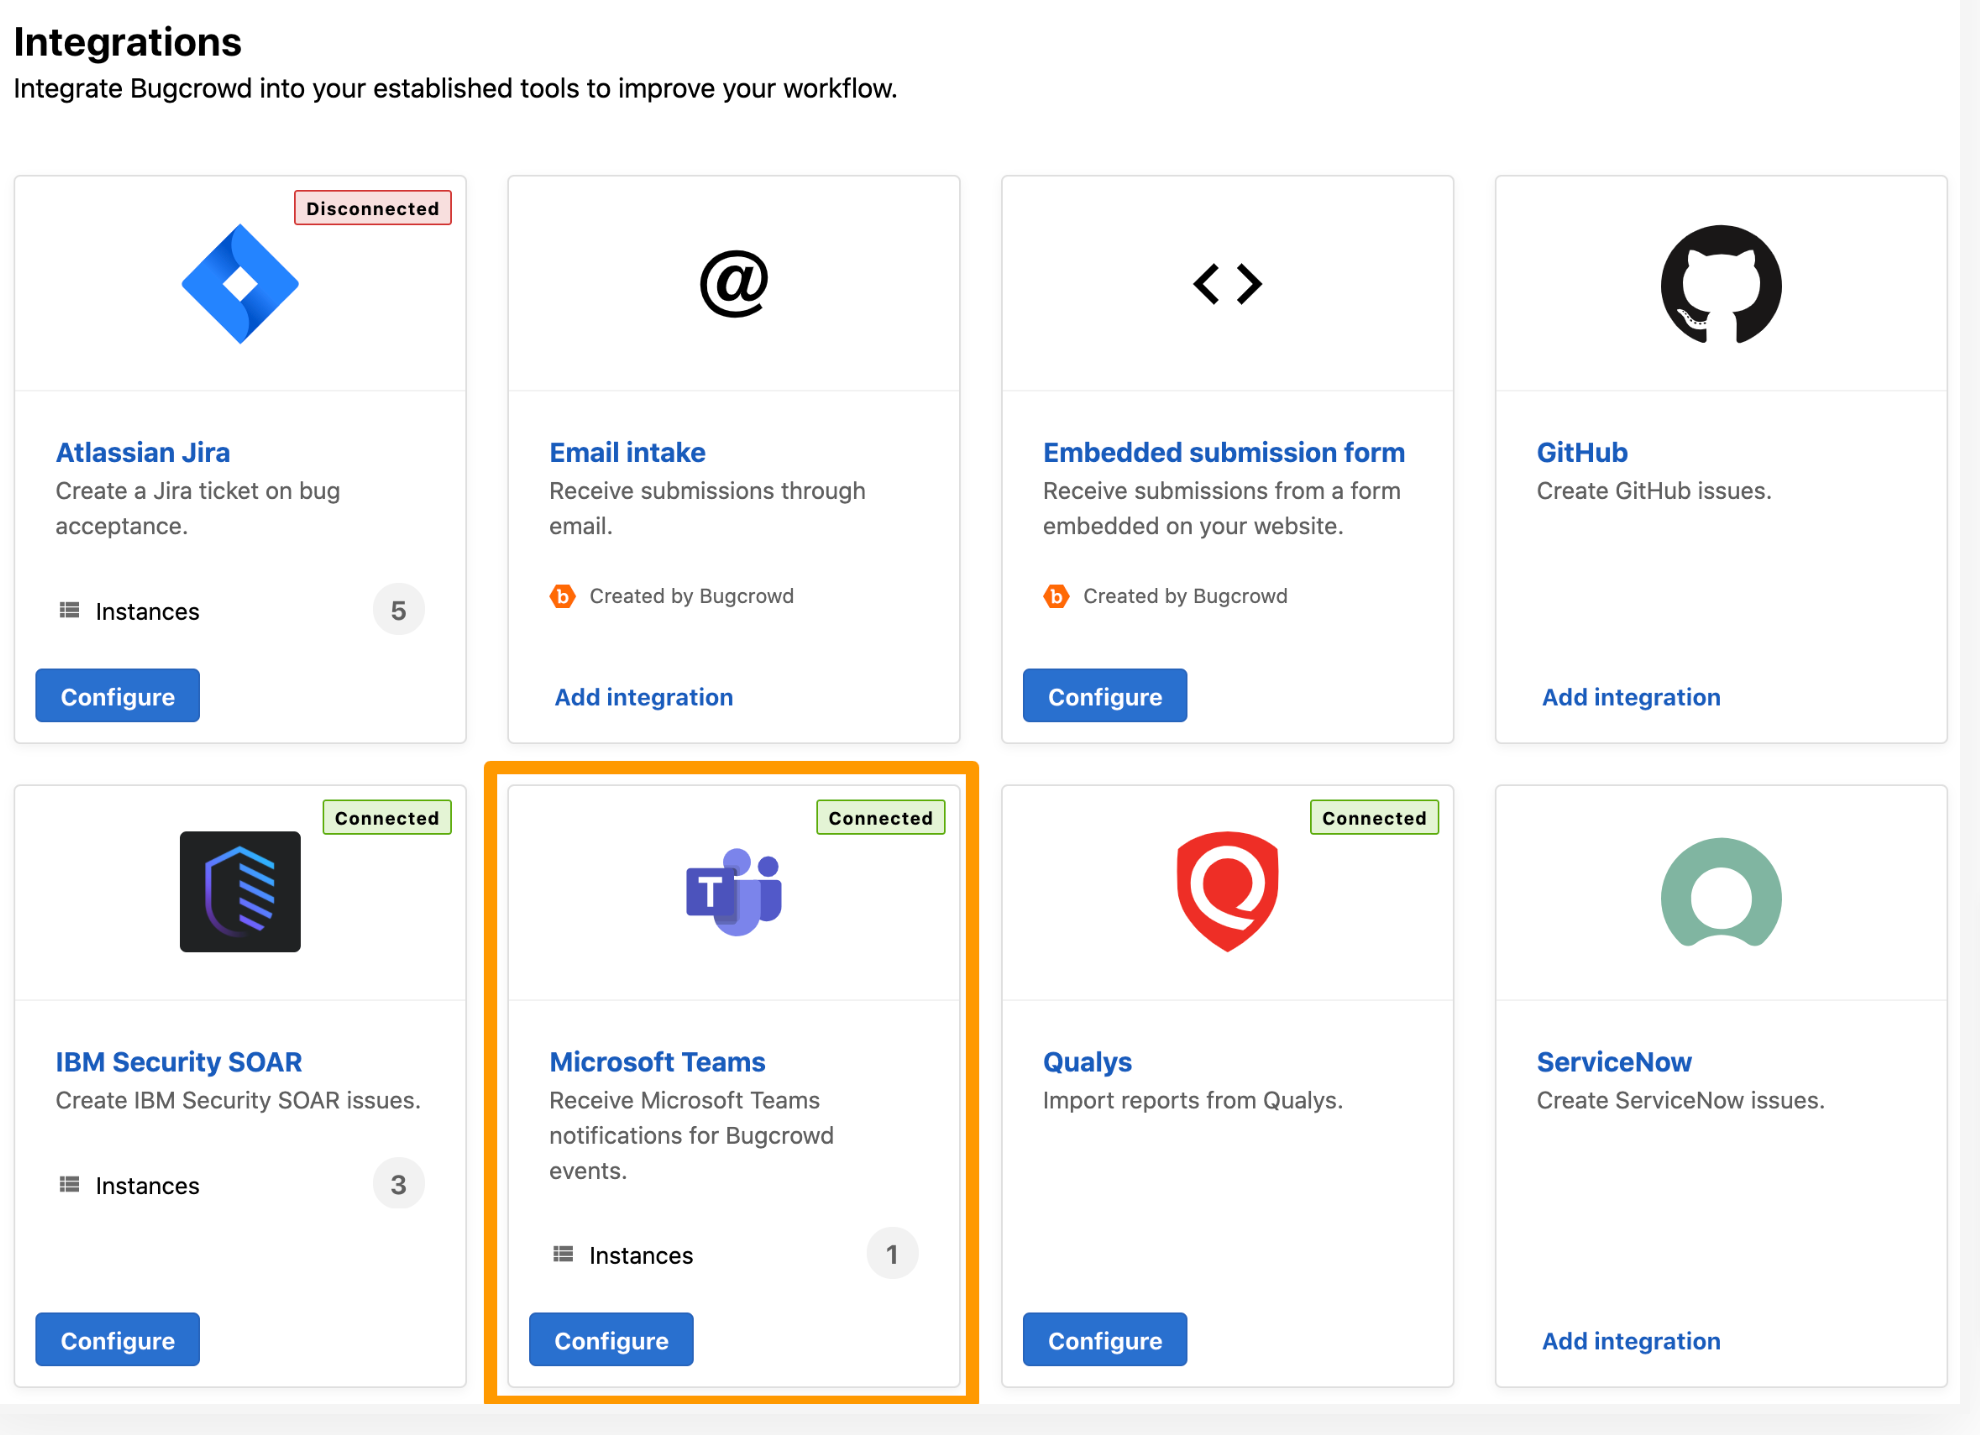 The Integrations page displays Connected for Microsoft Teams